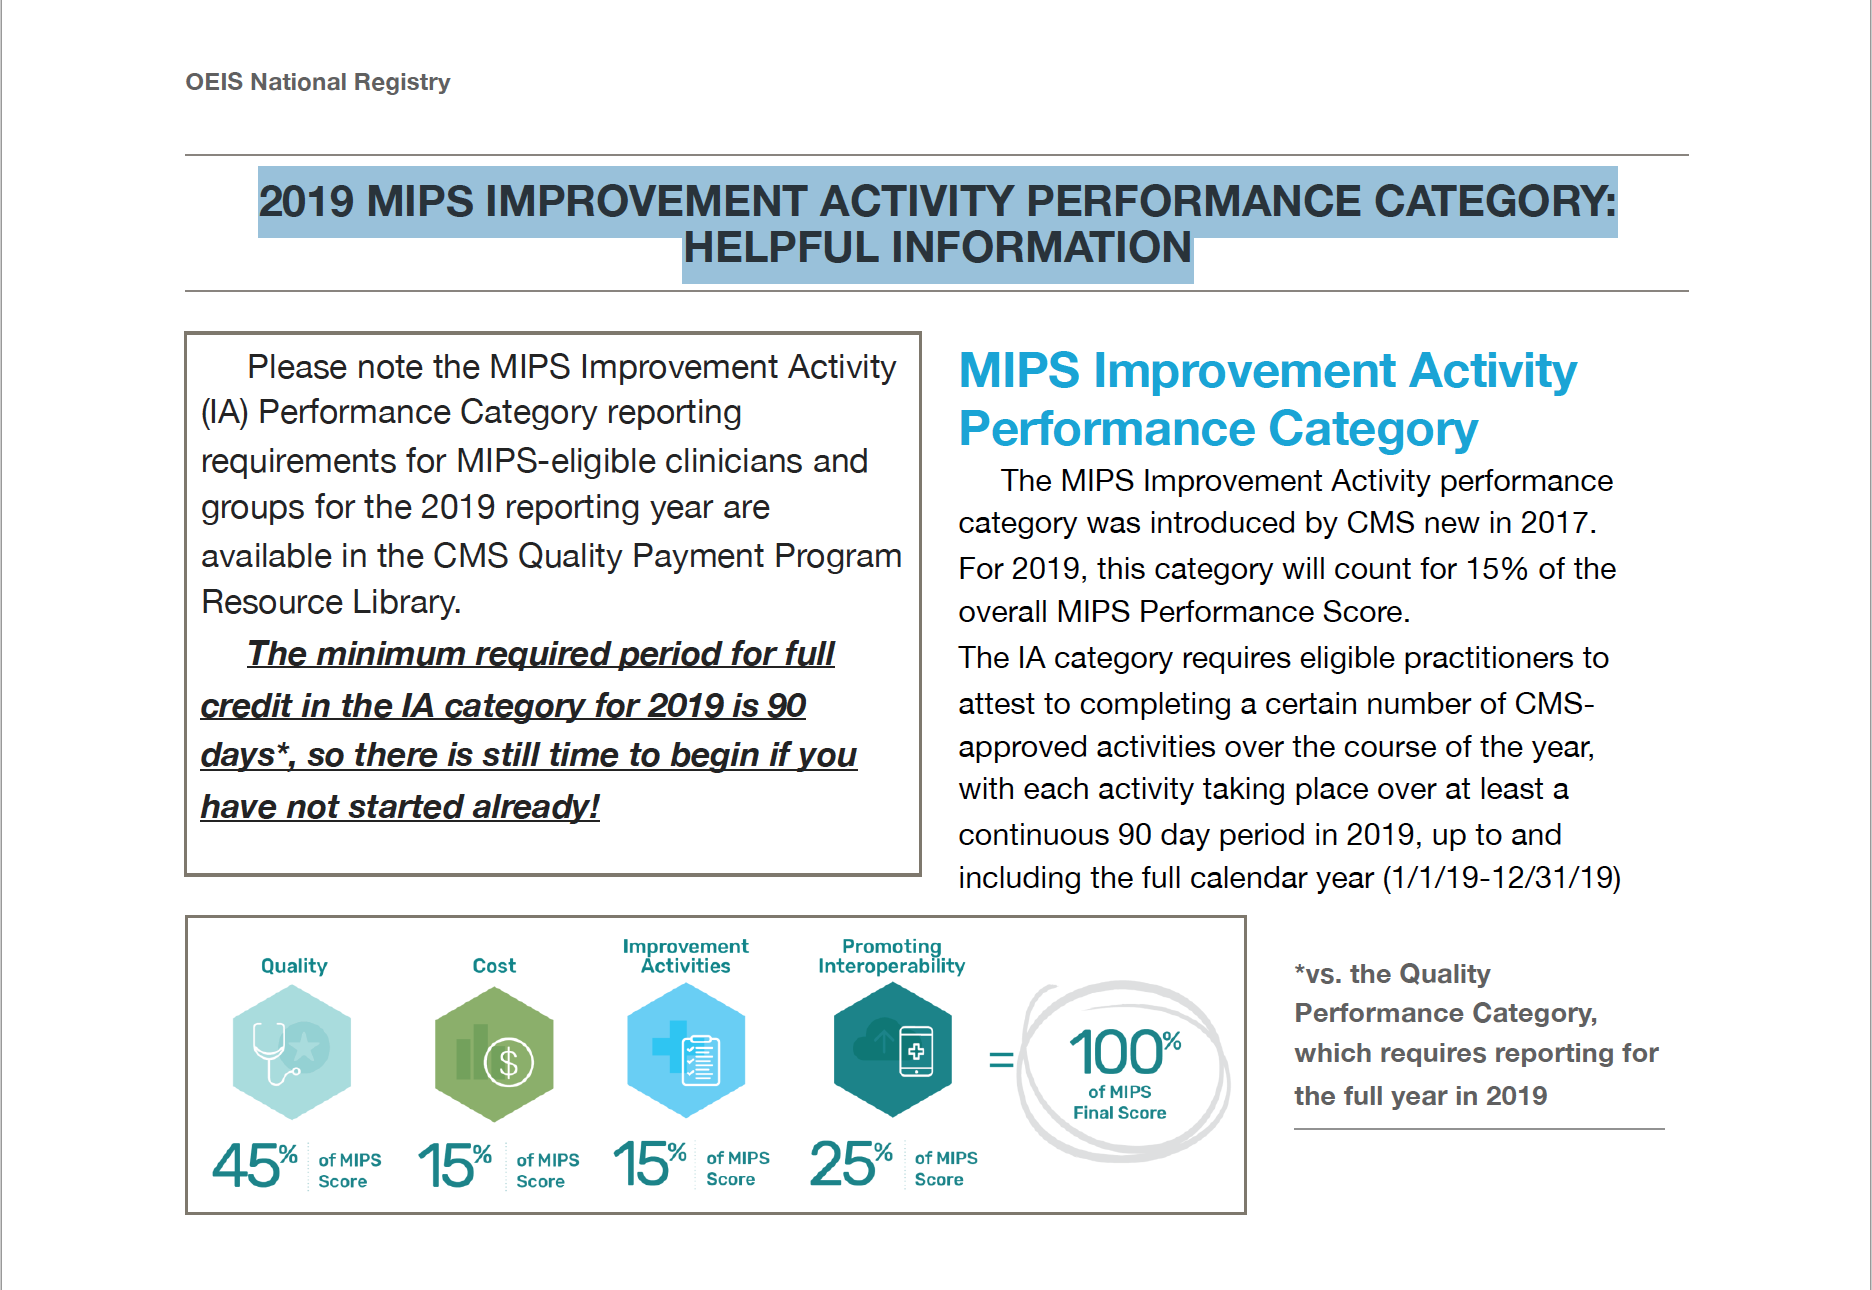 2019 MIPS Improvement Activity Performance Category -- Helpful Information.